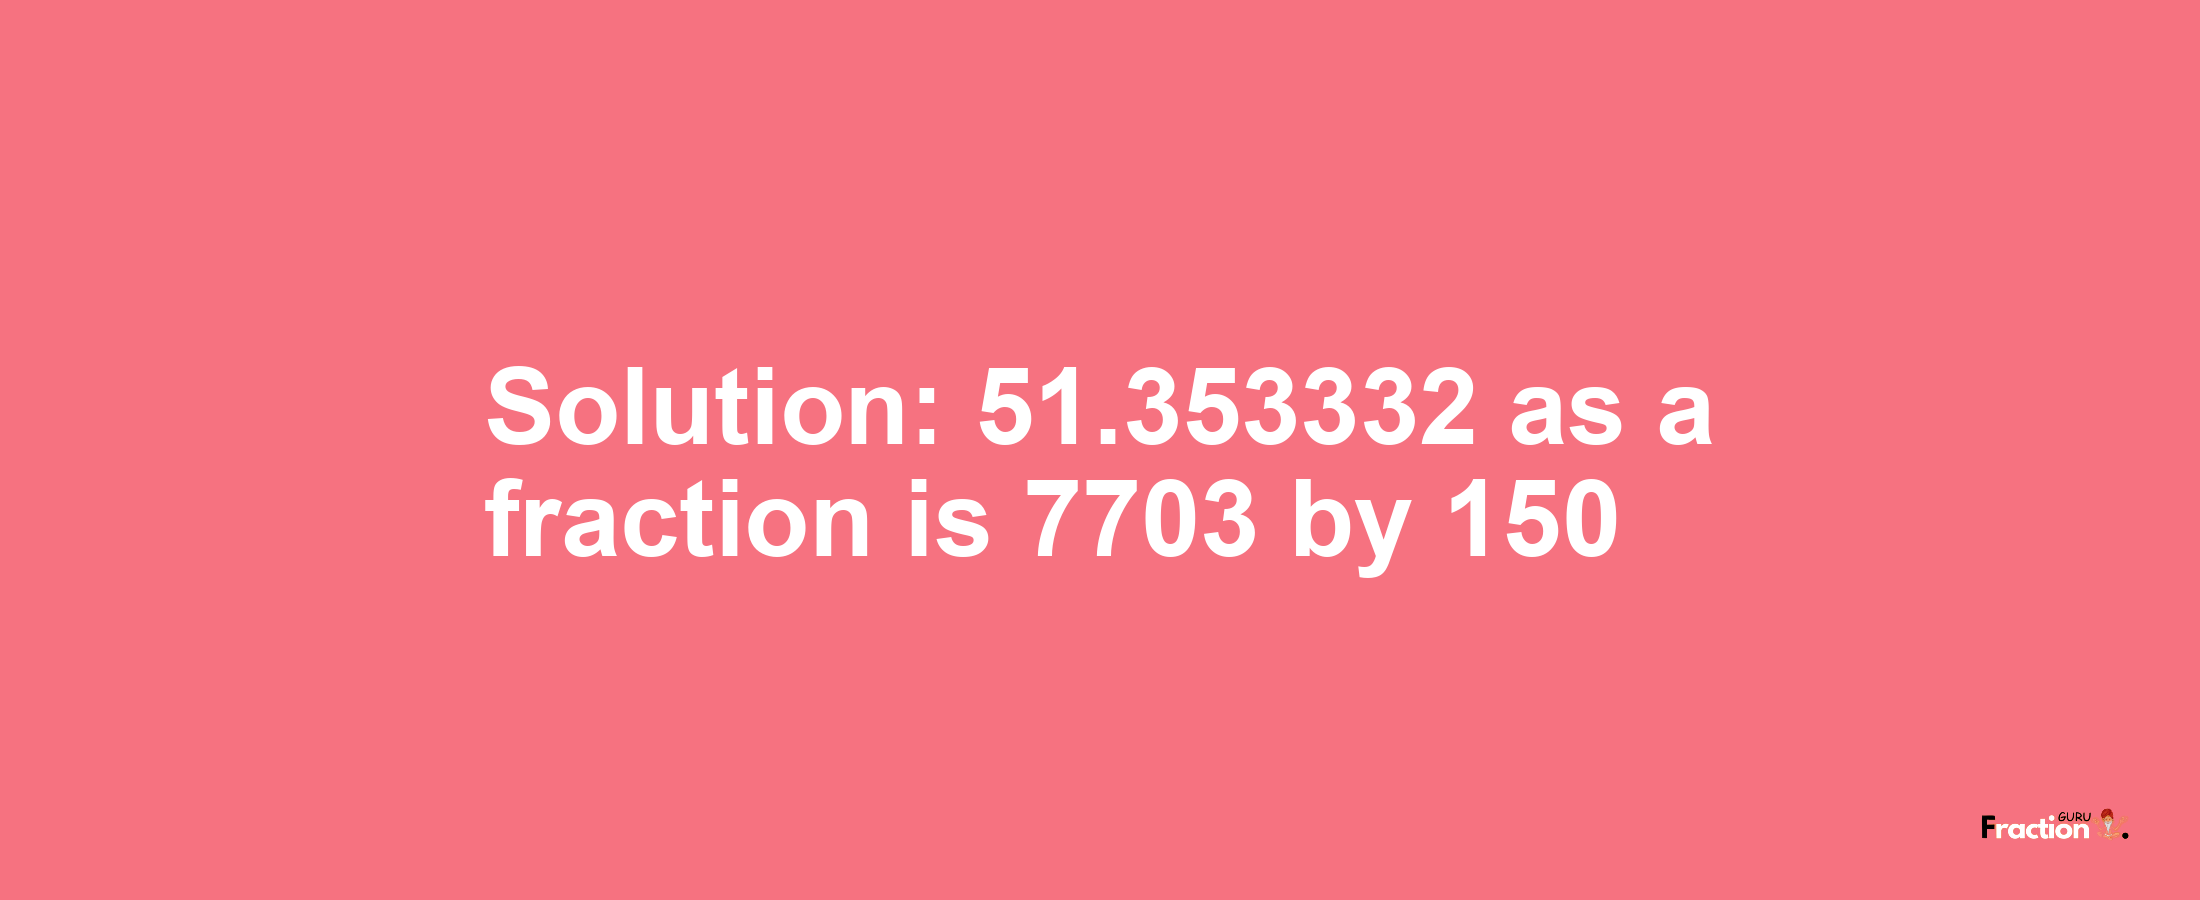 Solution:51.353332 as a fraction is 7703/150